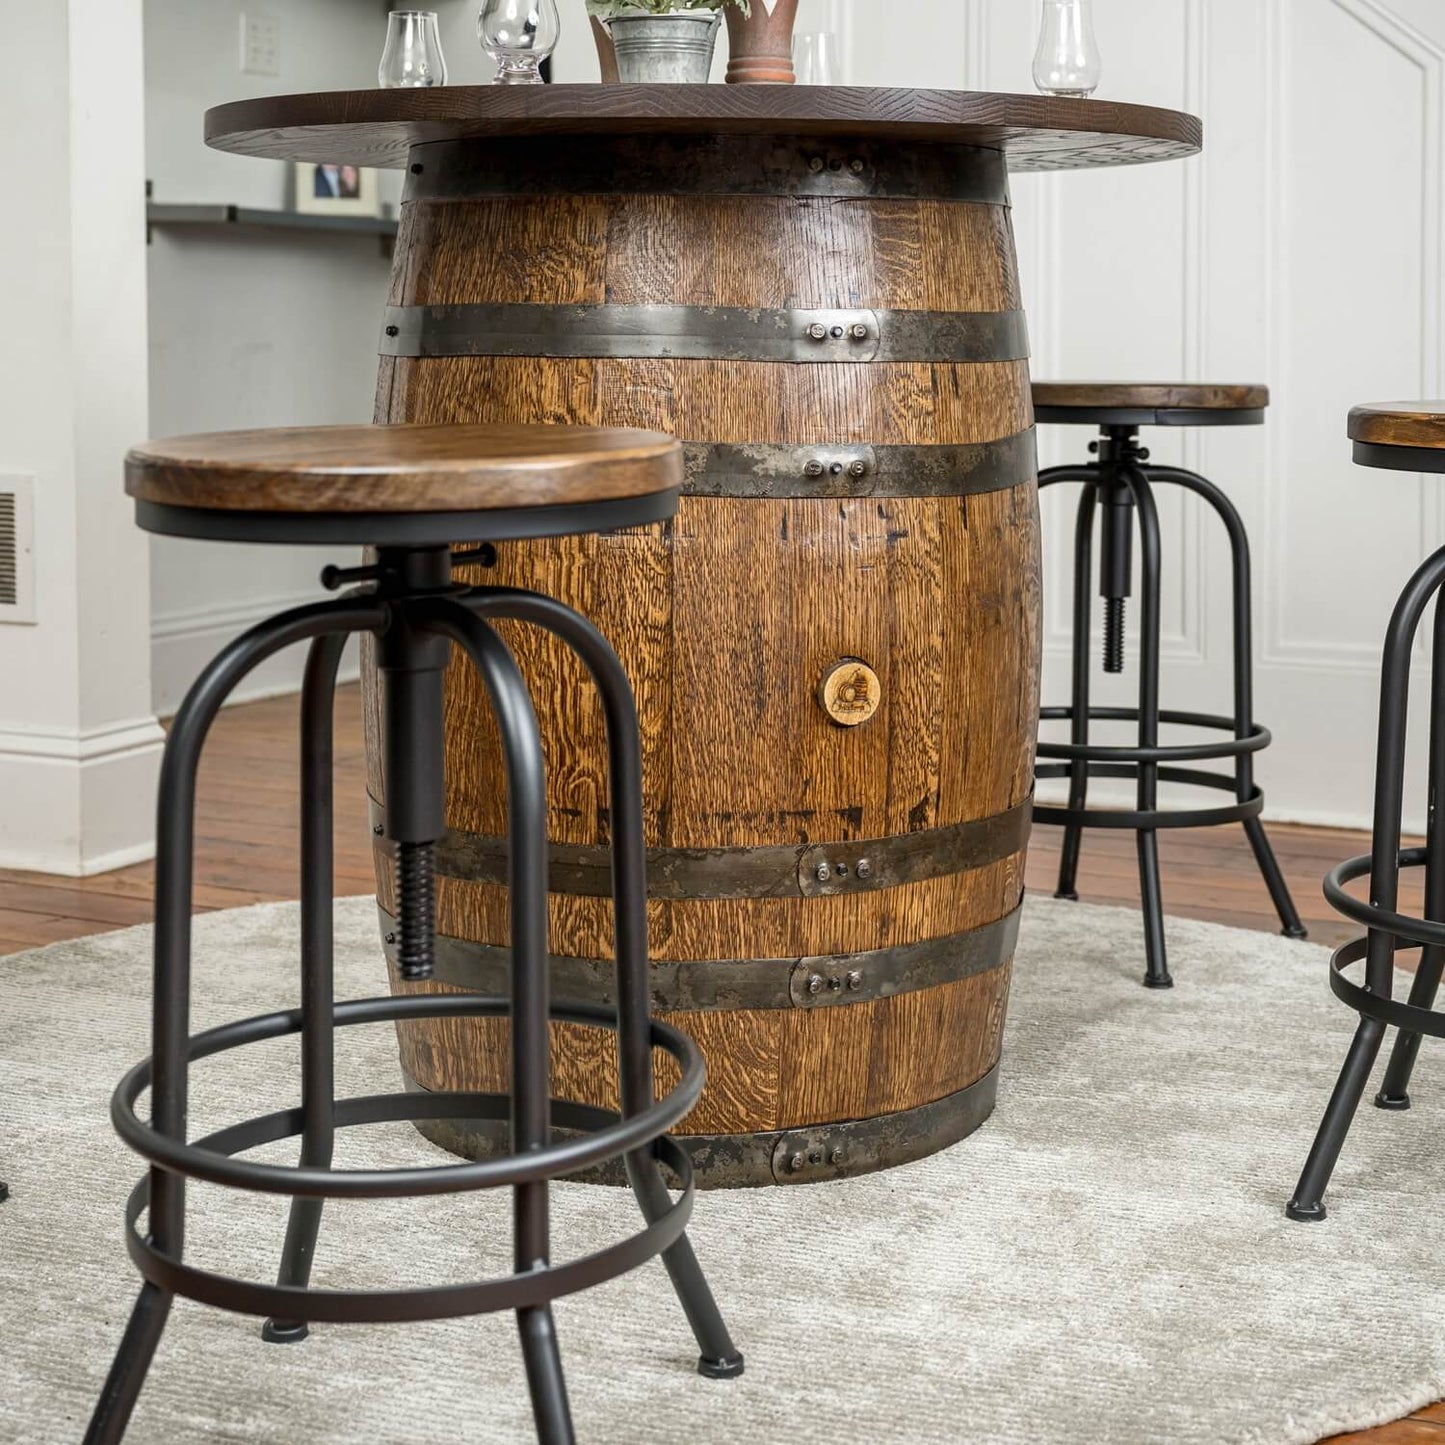 Deluxe Whiskey Barrel Pub Table w/ 36" or 48" Table Top AND Cabinet